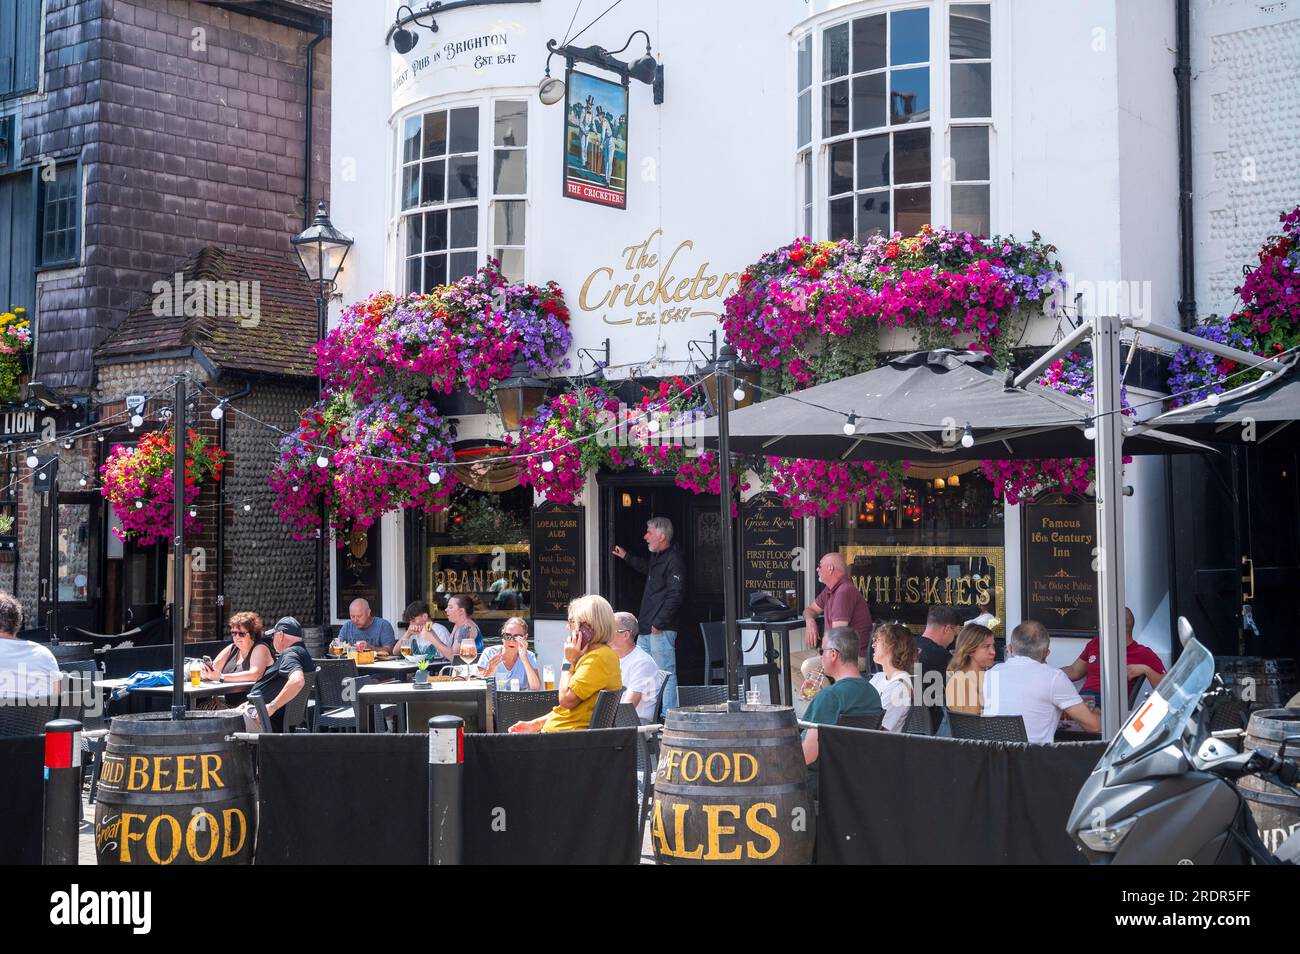 Brighton Views , Sussex , England , UK - The famous Cricketers pub in The Lanes area of Brighton with colourful hanging baskets Stock Photo